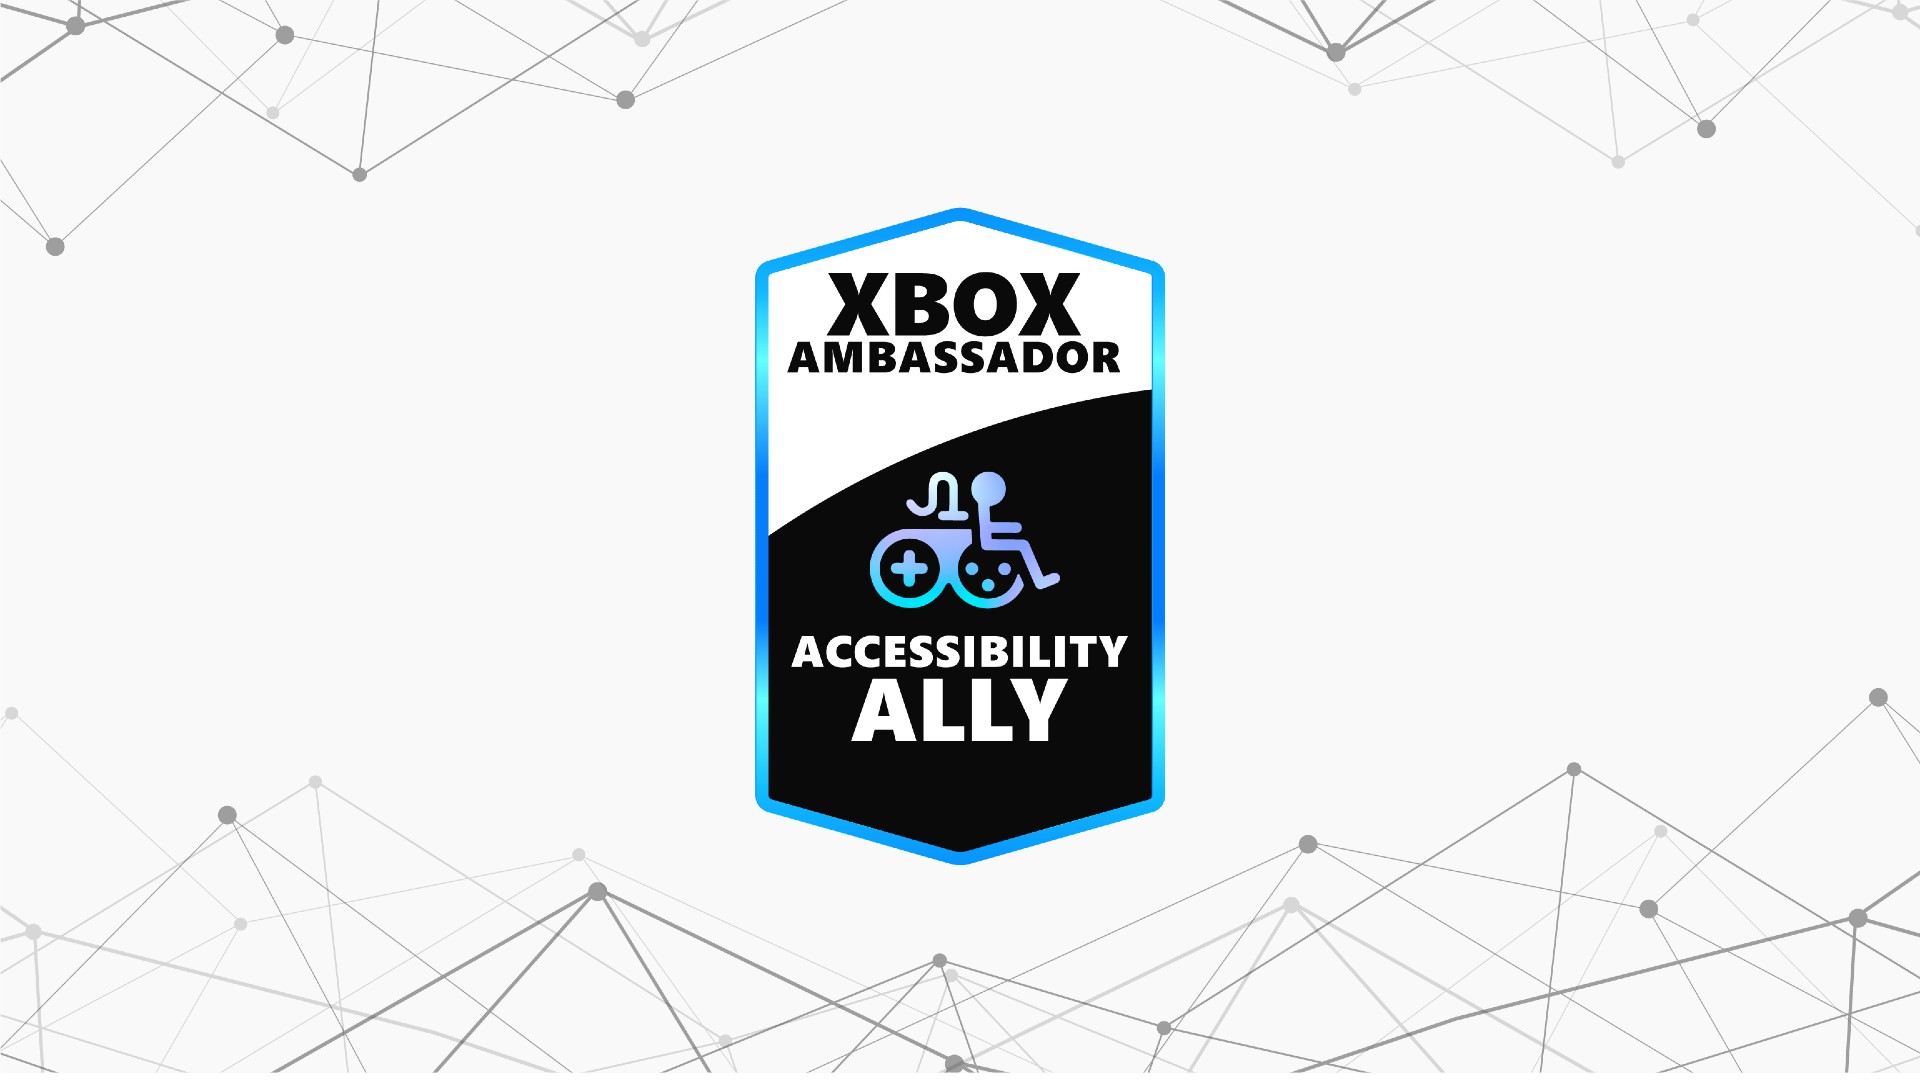 Illustration of the Xbox Ambassador Accessibility Ally digital badge that will display on Xbox profiles. The Badge is a tall hexagon shape with a gradient blue outline, featuring the Game Accessibility logo and the text Xbox Ambassador Accessibility Ally